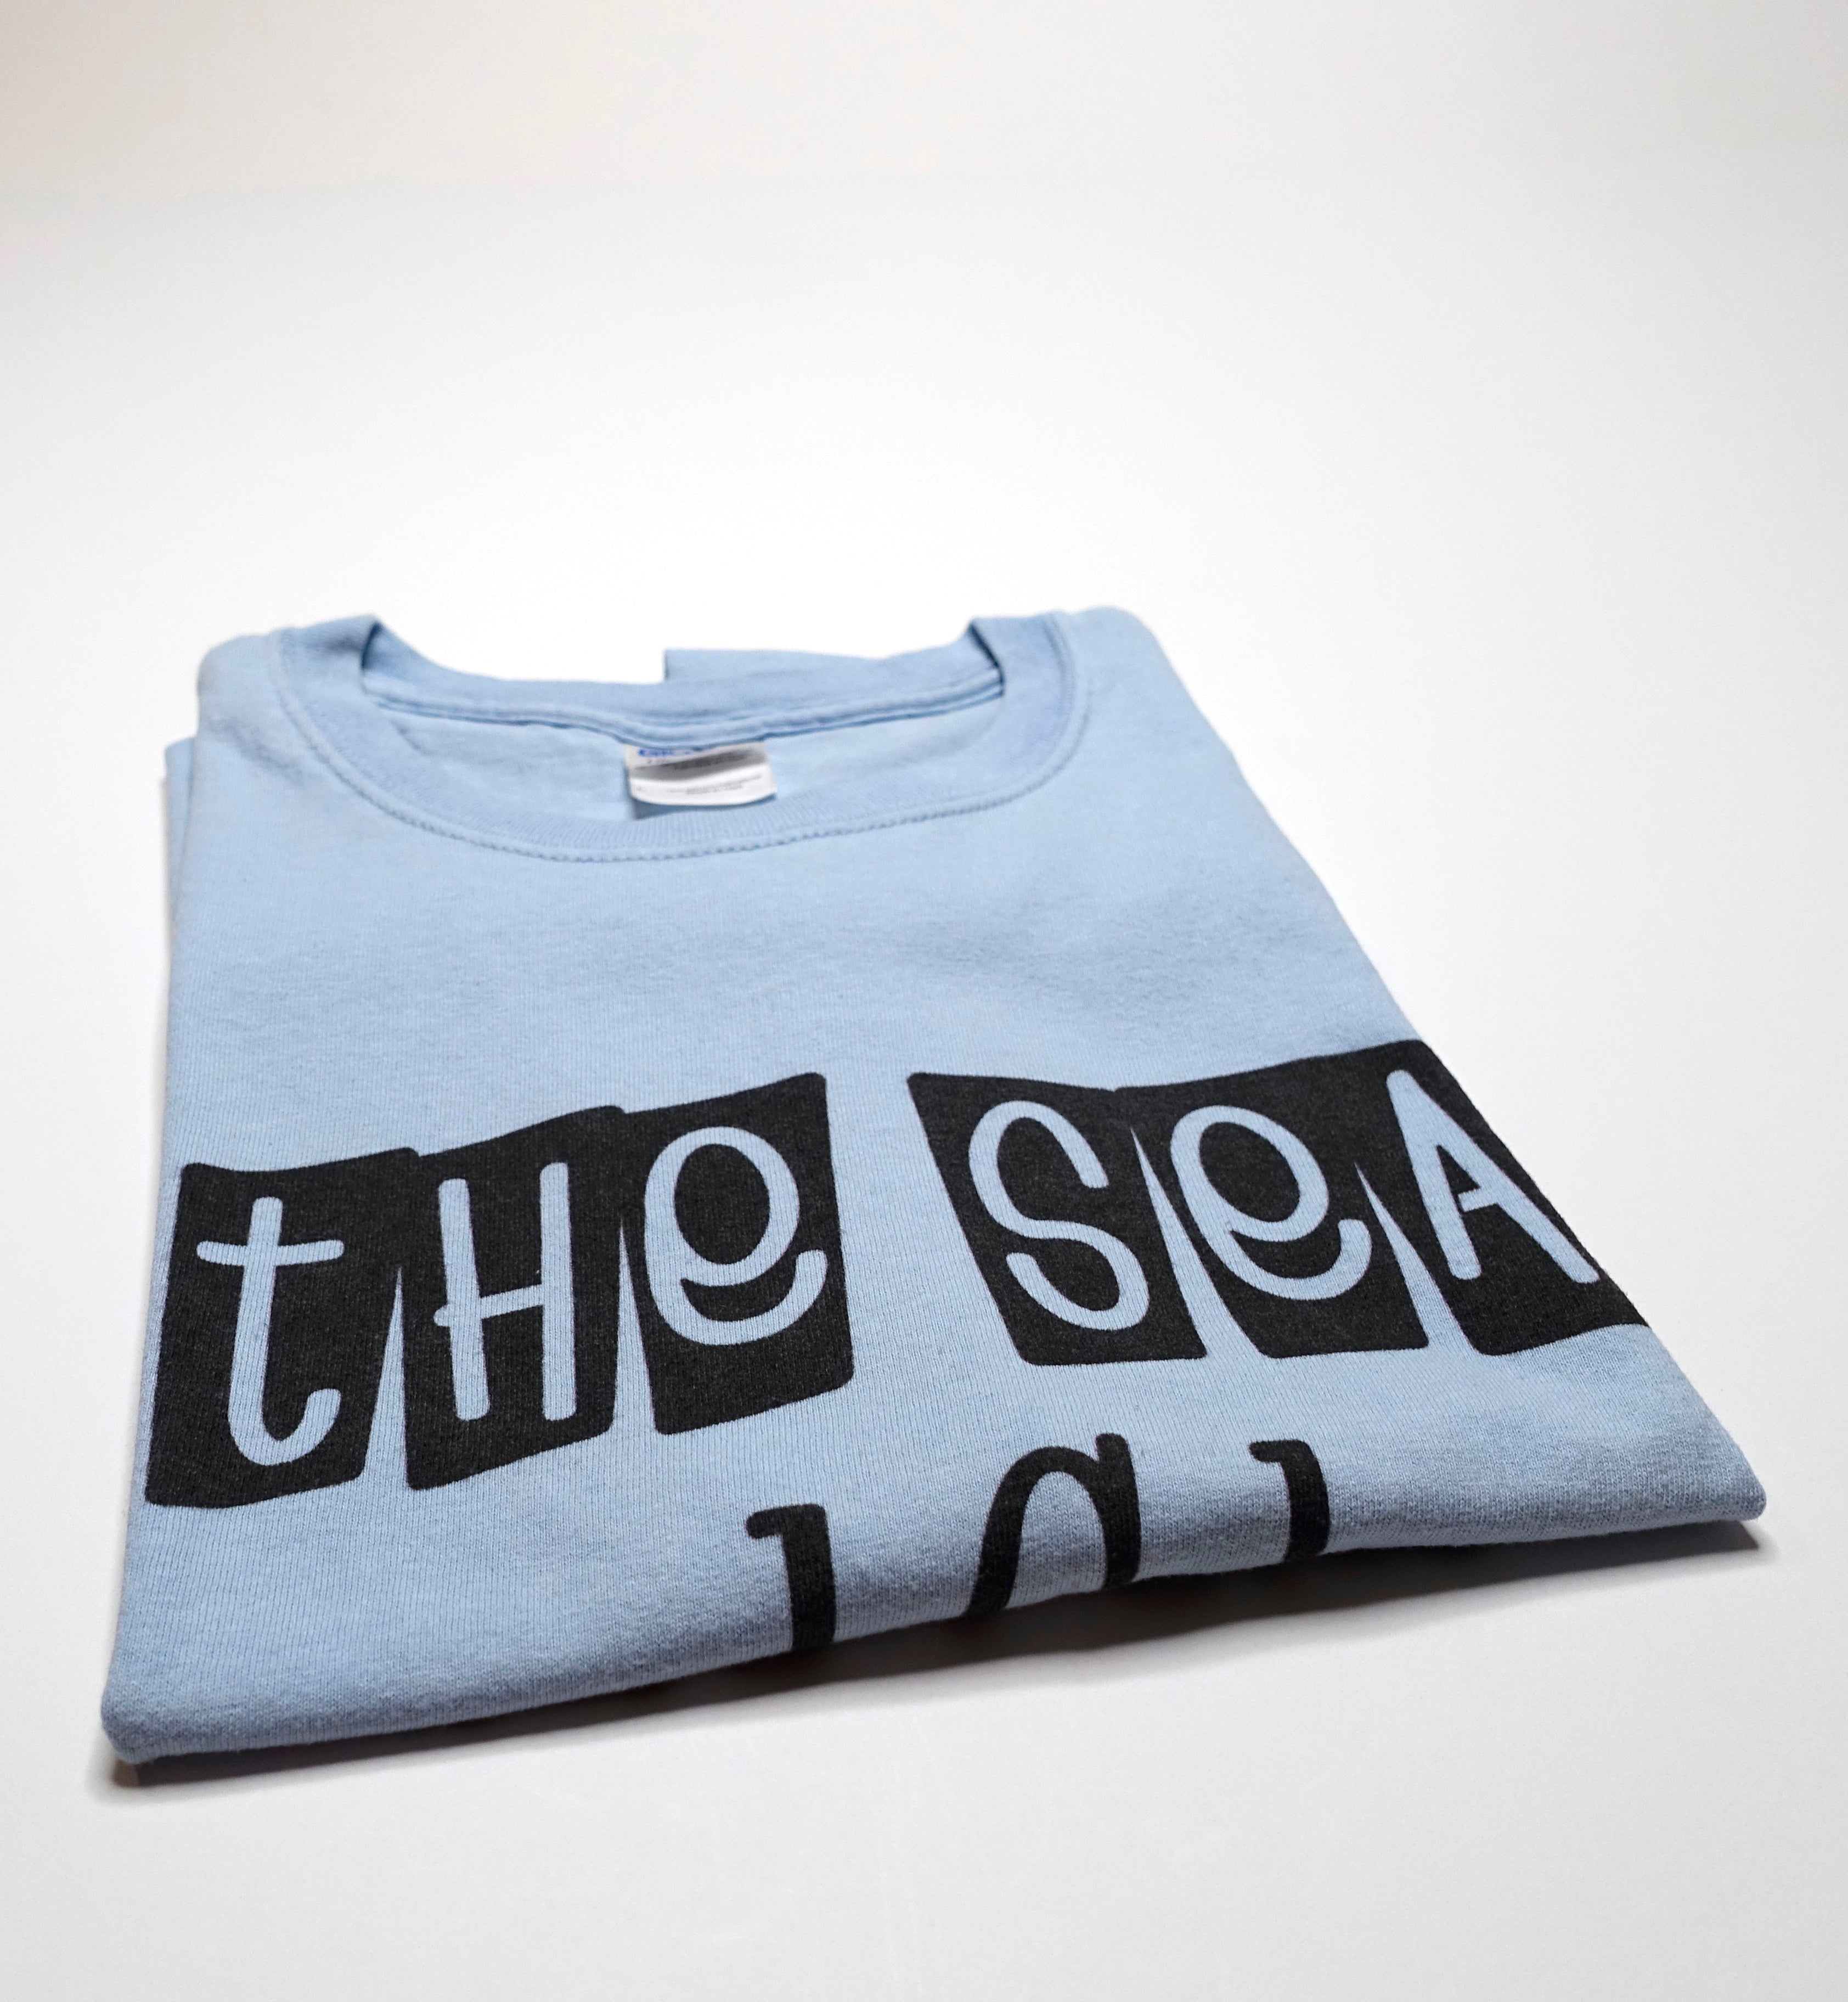 the Sea And Cake‎ – 2 Font Tour Shirt Size Large